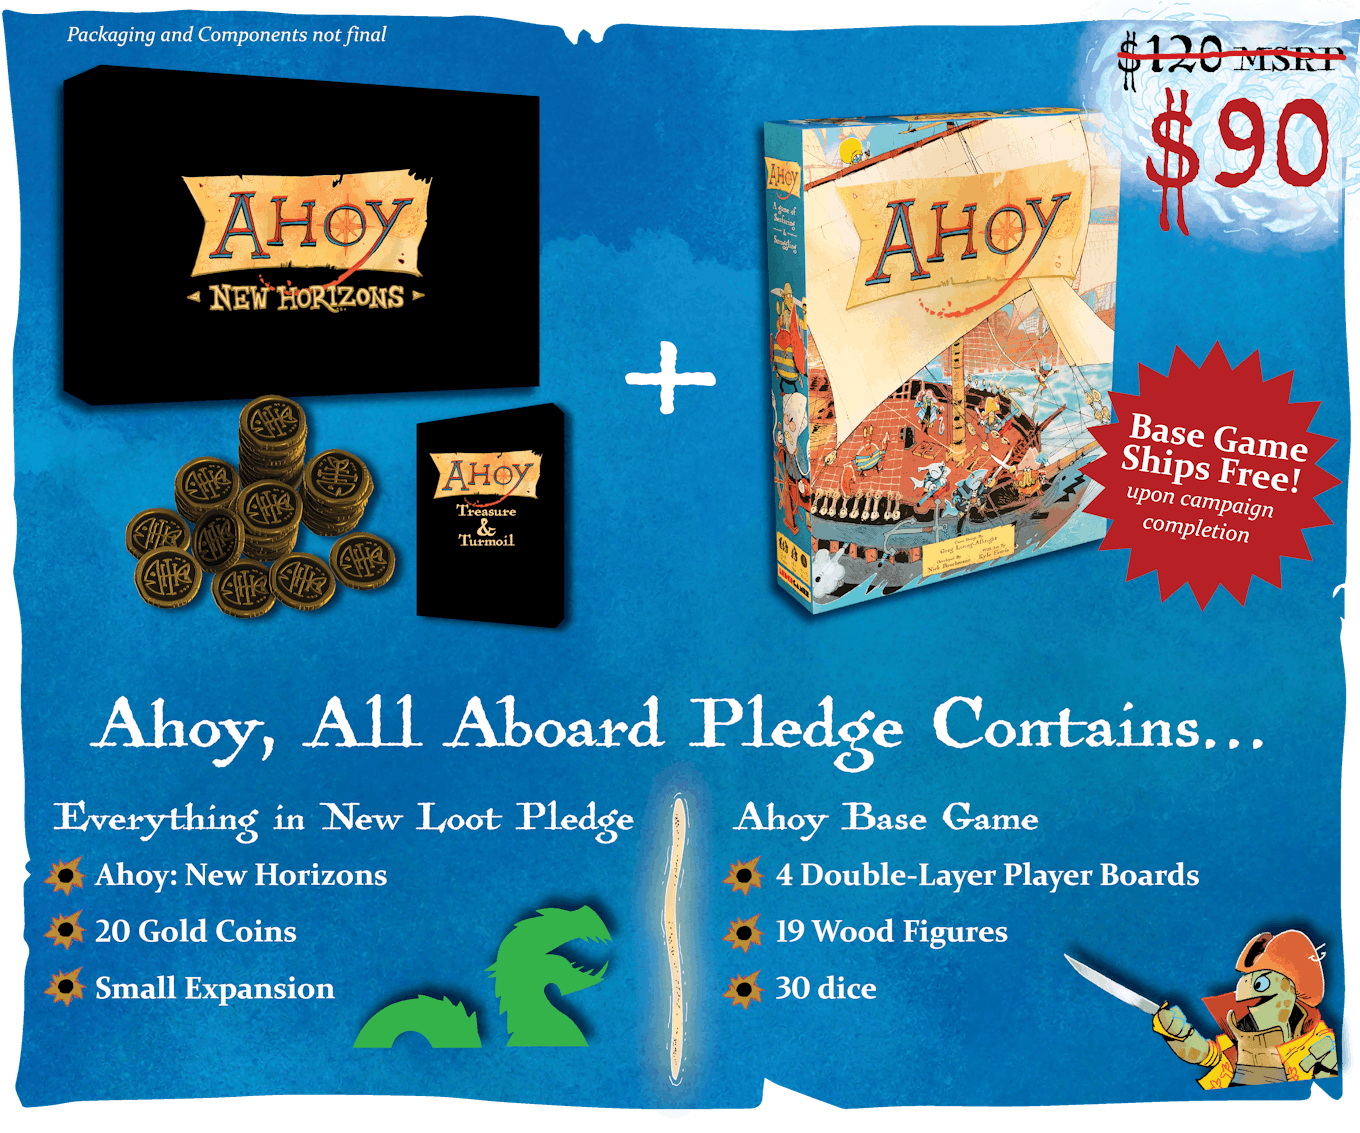  The Ahoy All Aboard pledge level includes:  4 new factions, including: The Blackfish Brigade, The Shellfire Rebellion, The Leviathan, and The Coral Cap Pirates. Deluxe metal coins to replace the cardboard coins in the Ahoy base game. A mini expansion of brand new content. This level adds the Ahoy Base Game, which will ship to you following this campaign.